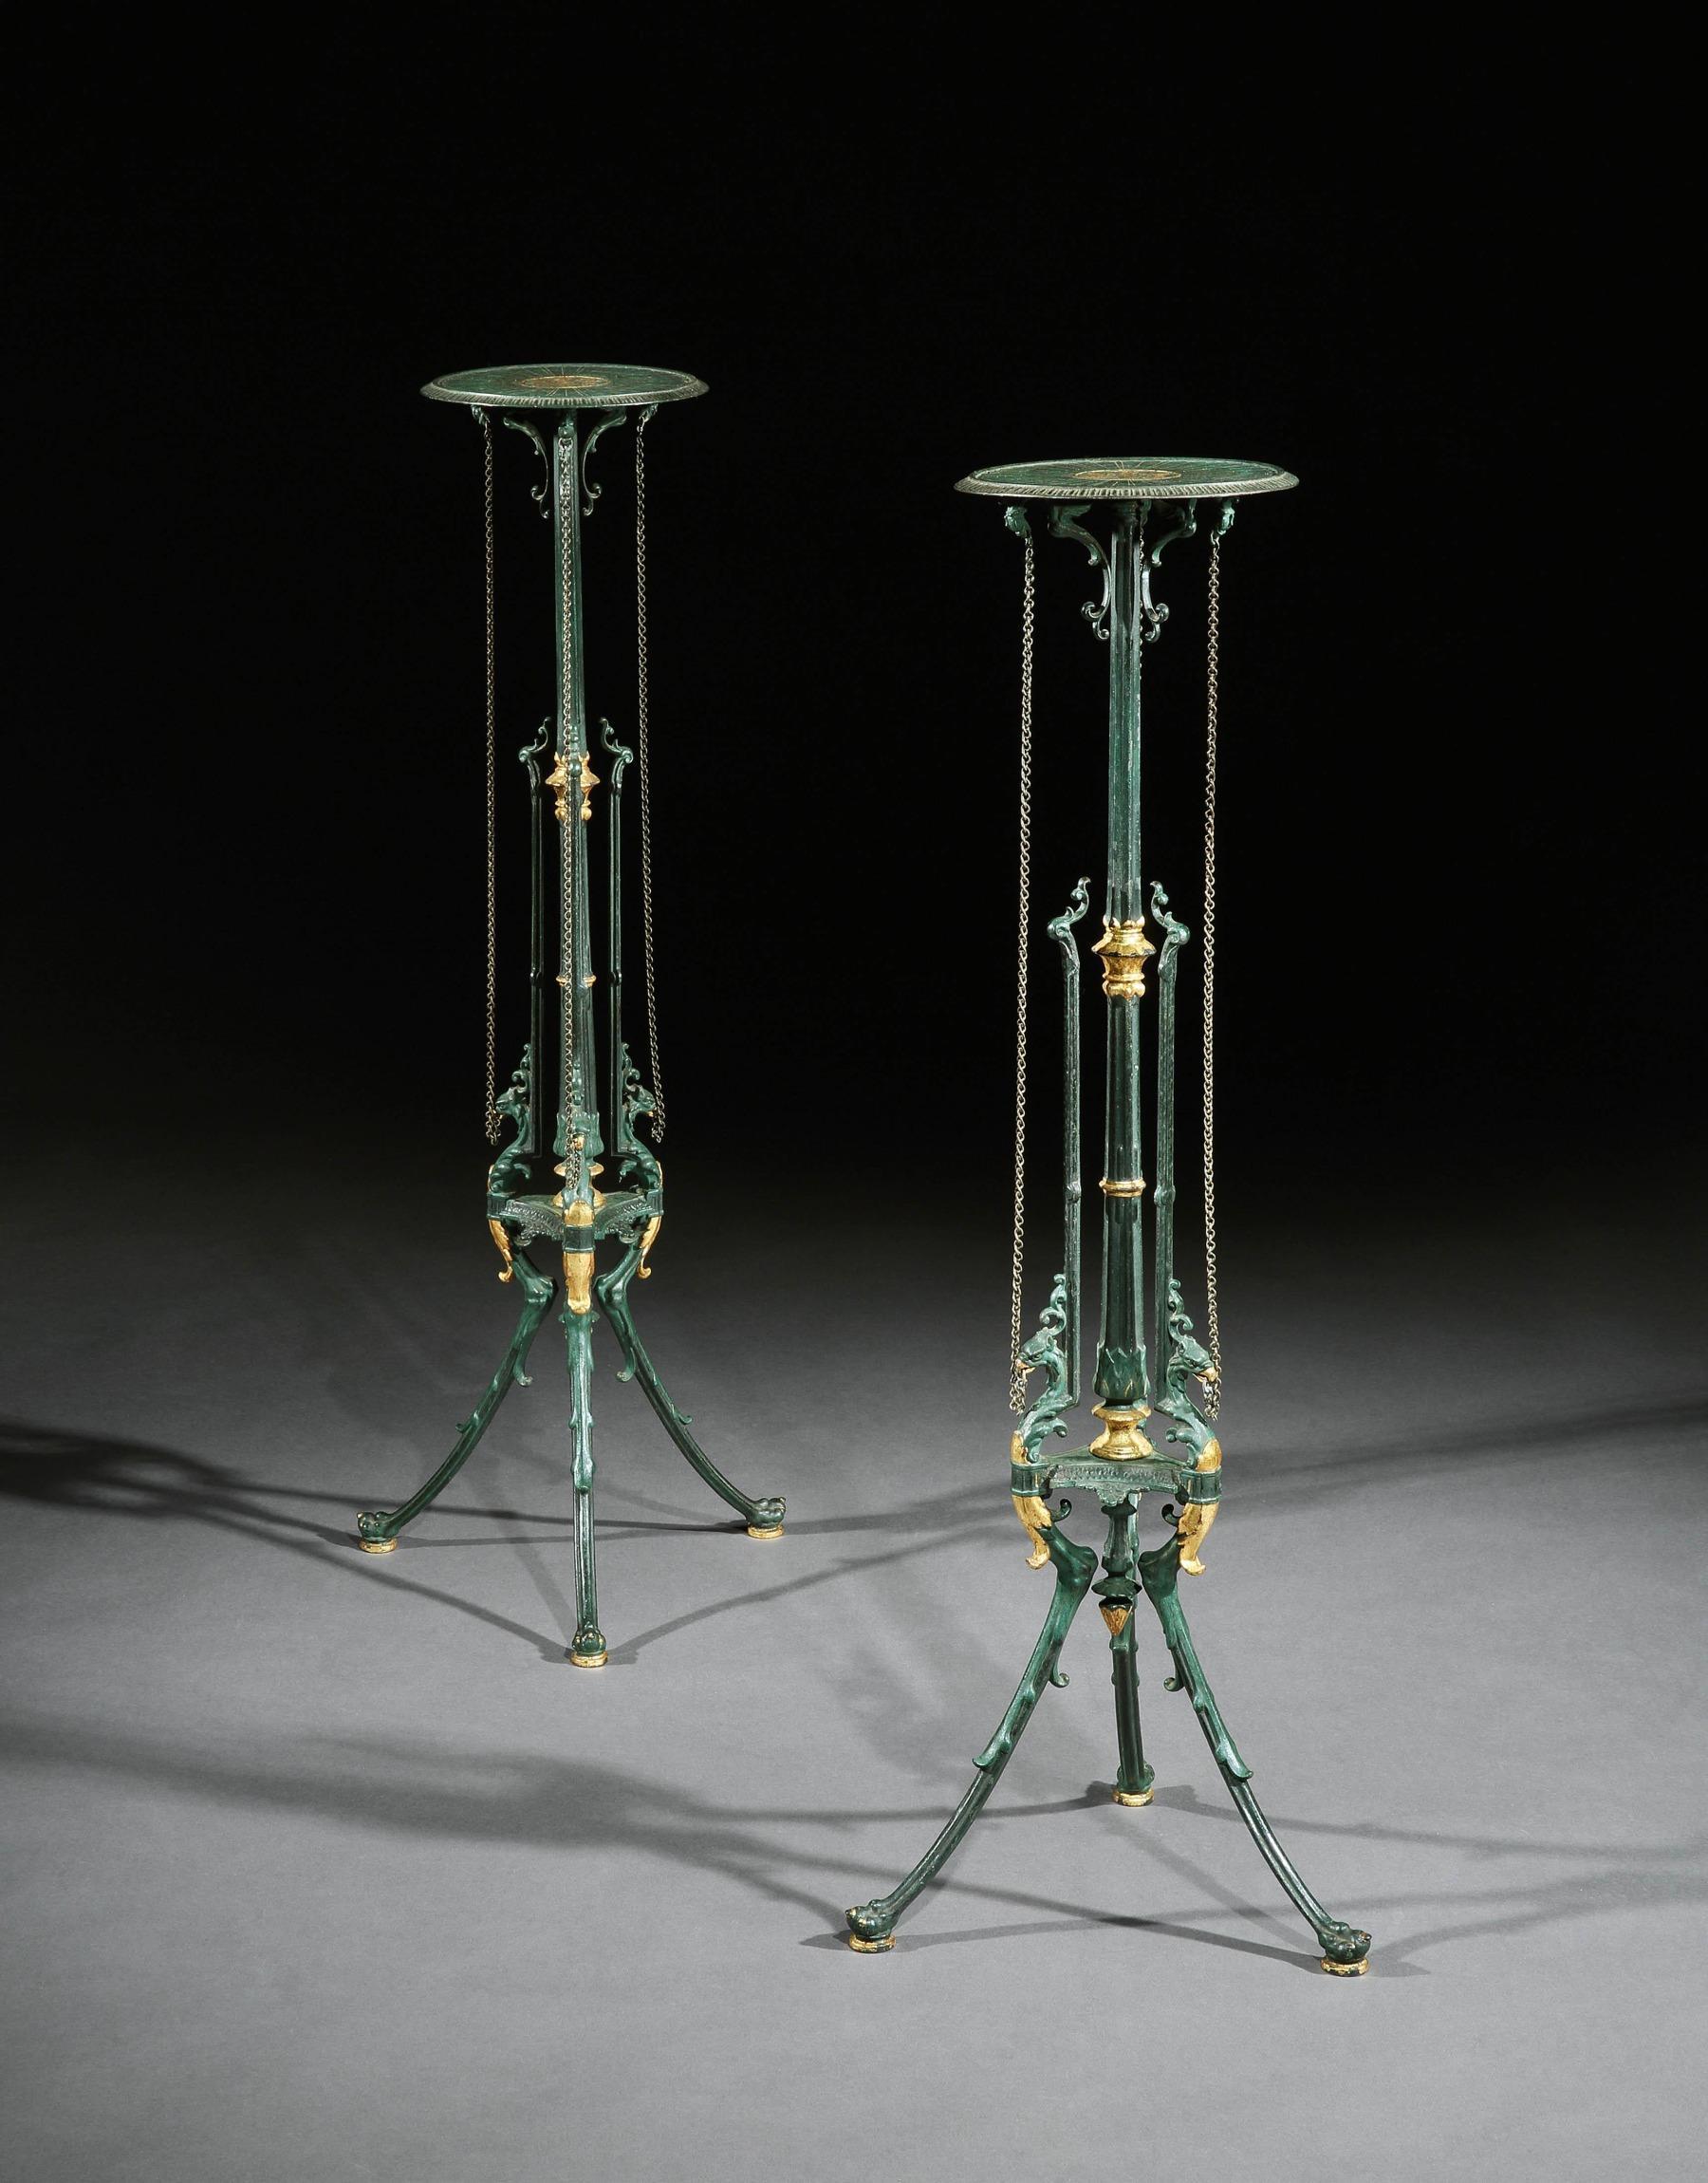 A decorative pair of late 19th century painted and parcel-gilt German cast iron jardinière stands or torchères retaining by Zimmermann. German circa 1880 Retaining their original green paint and gilt work, a wonderful pair jardinière’s or torchères